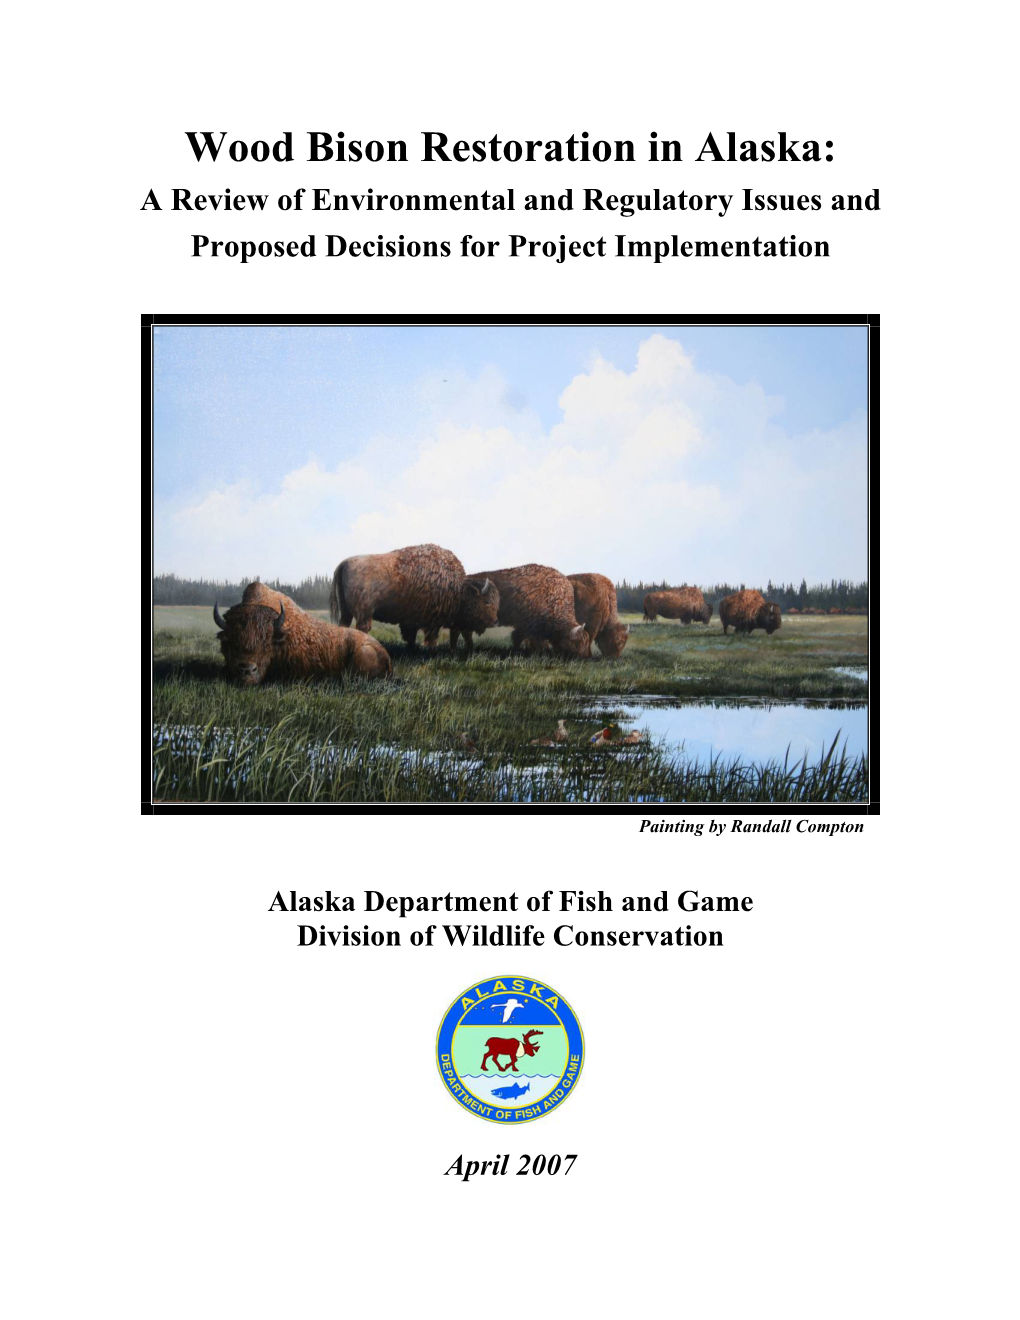 TABLE of CONTENTS Review of Wood Bison Restoration on Yukon